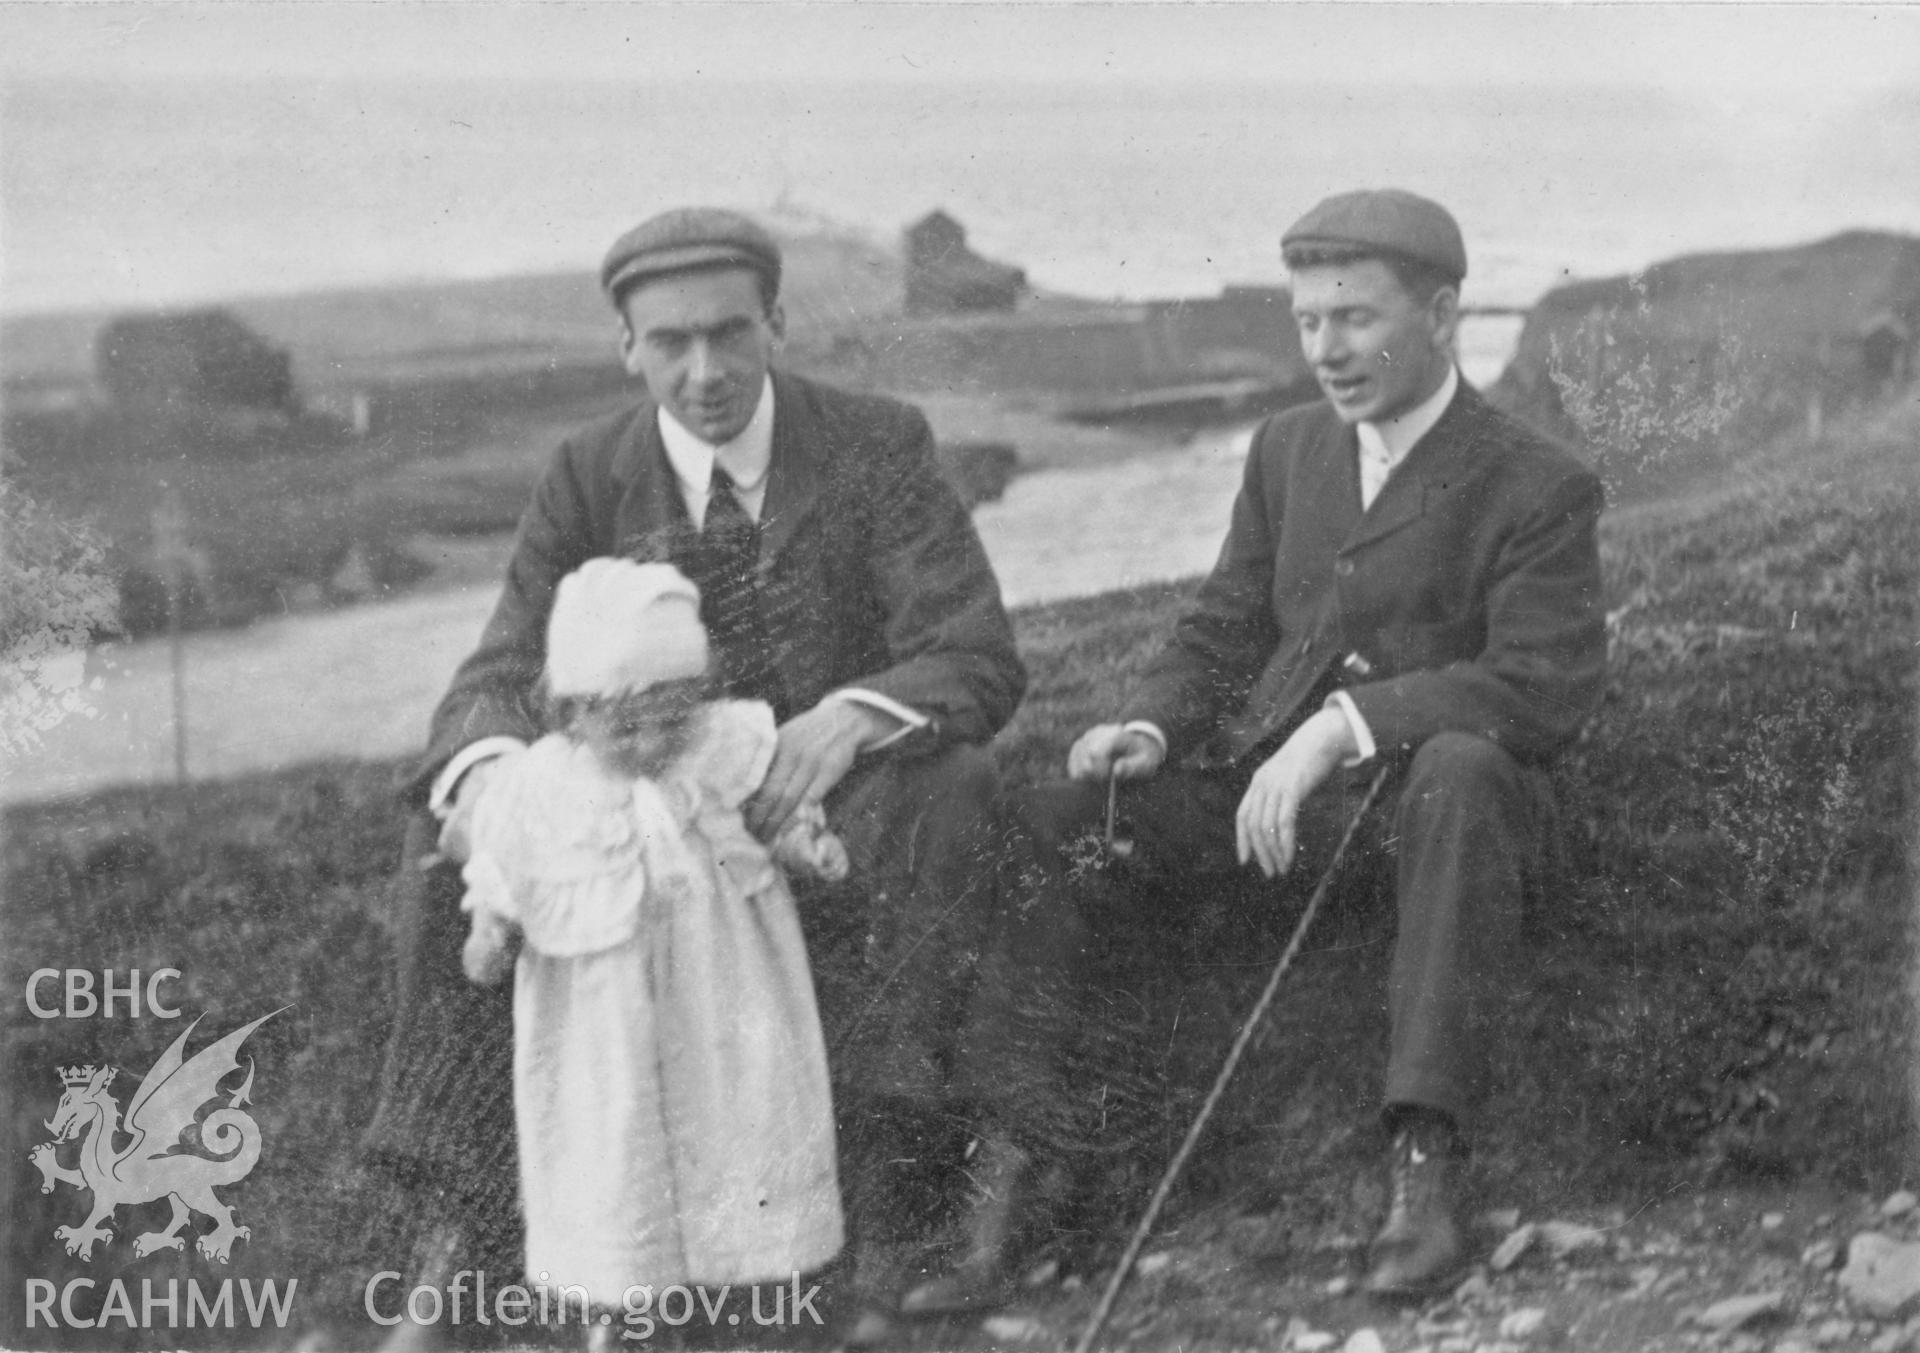 "Returning from Pen Dinas 1903". Photo of two adults and a small child. Digitised from a photograph album showing views of Aberystwyth and District, produced by David John Saer, school teacher of Aberystwyth. Loaned for copying by Dr Alan Chamberlain.